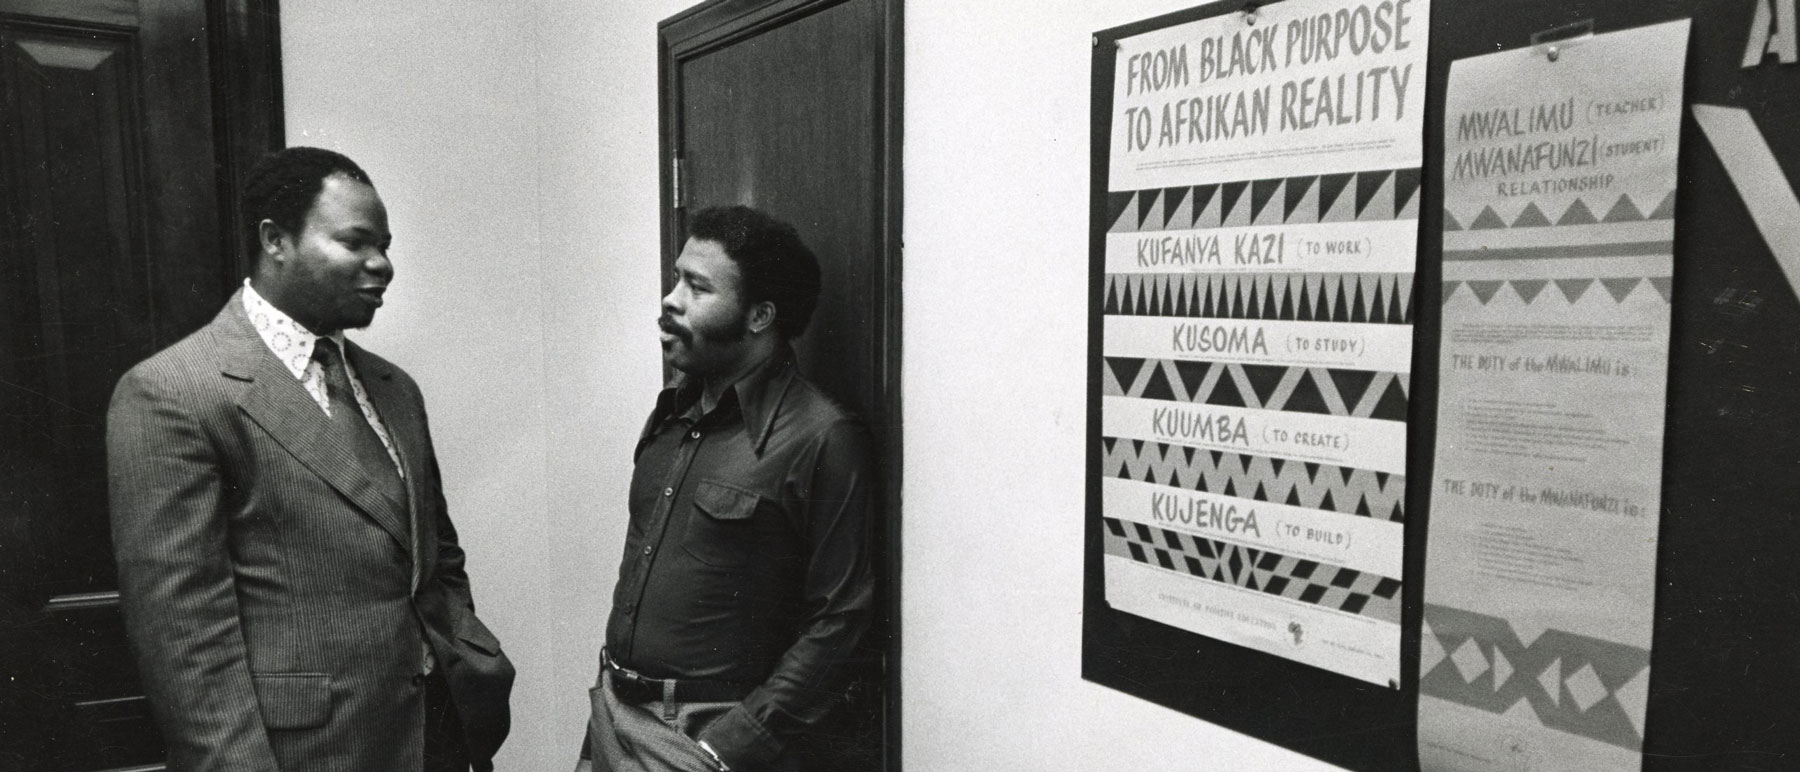 two v.c.u. professors from the 1970s have a hallway discussion in front of a poster titled 'from black purpose to afrikan reality'